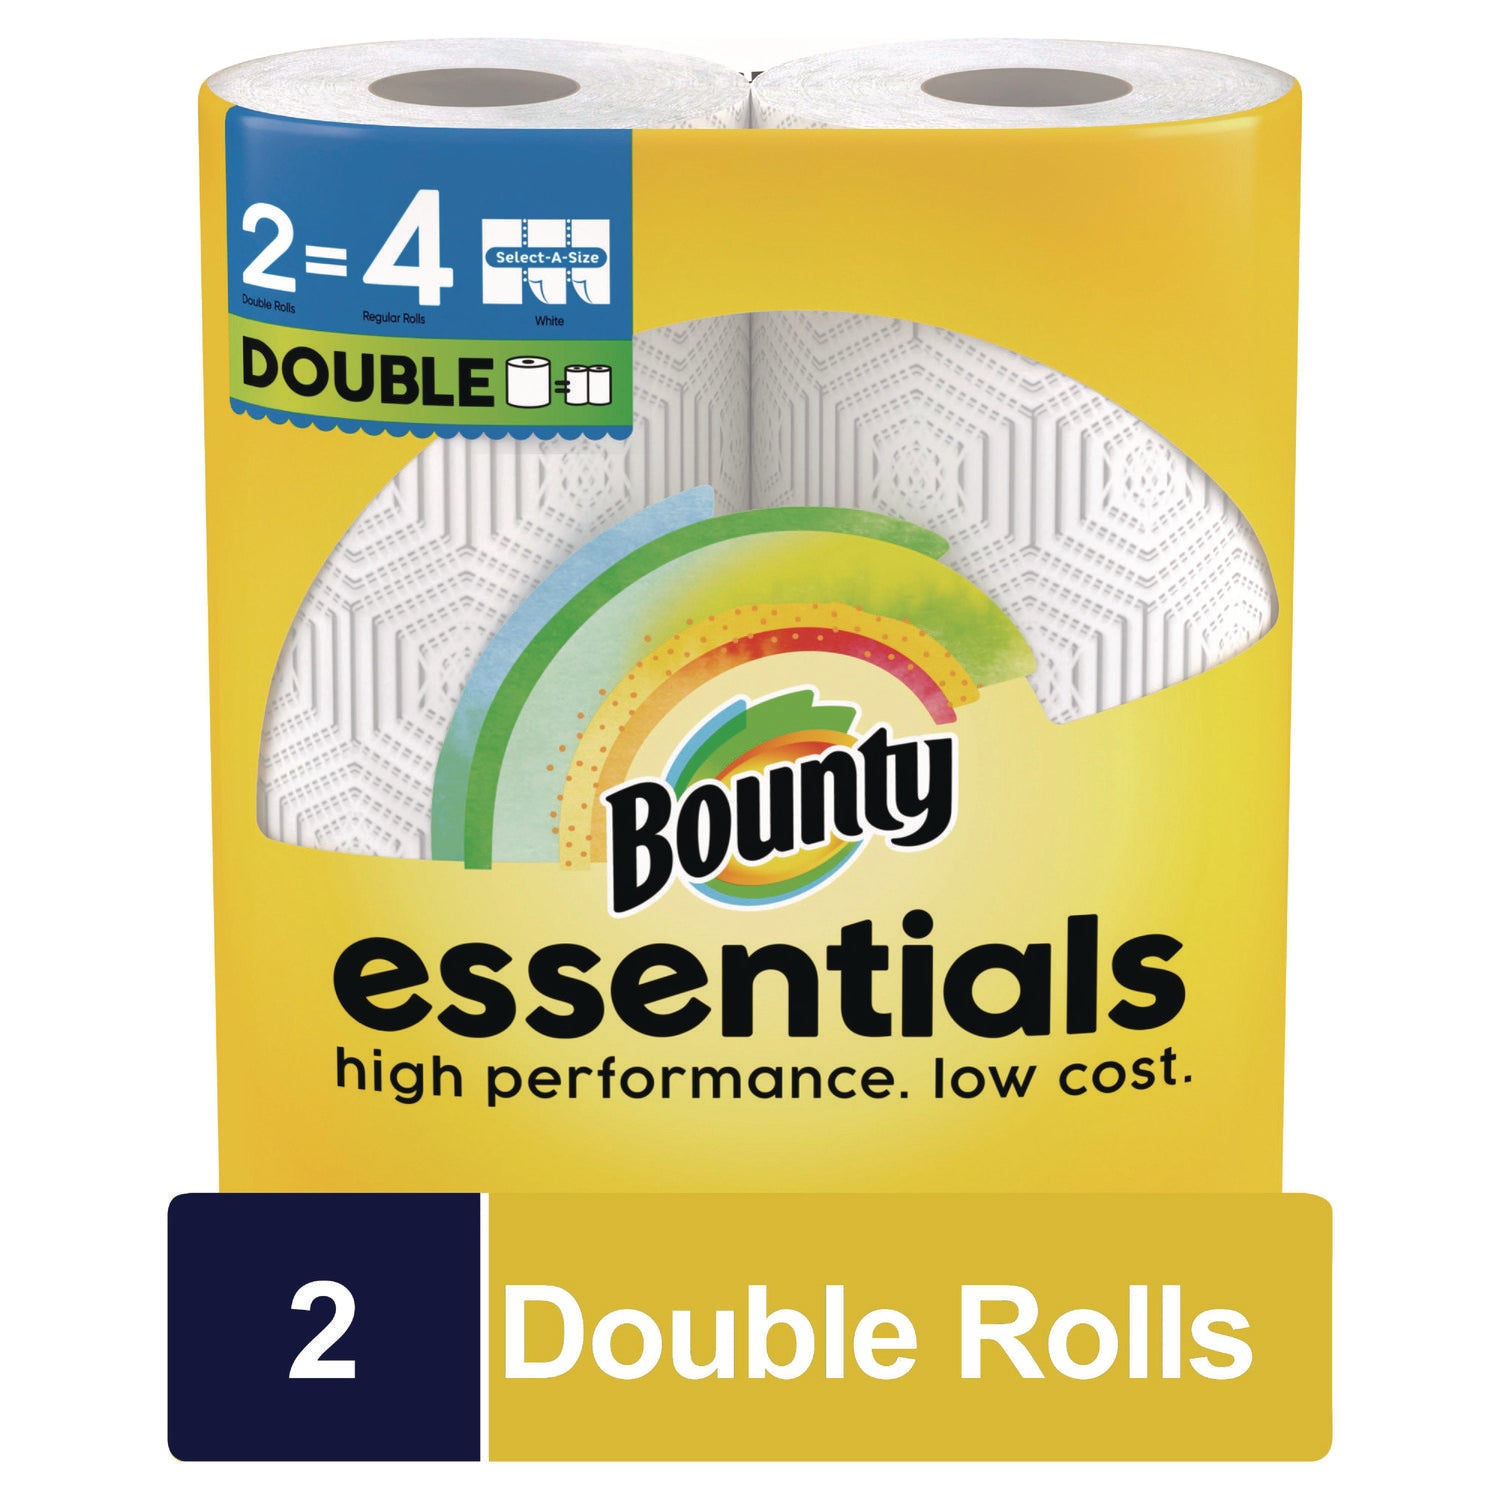 essentials-select-a-size-kitchen-roll-paper-towels-2-ply-white-108-sheets-roll-2-pack-8-packs-carton_pgc14019 - 2